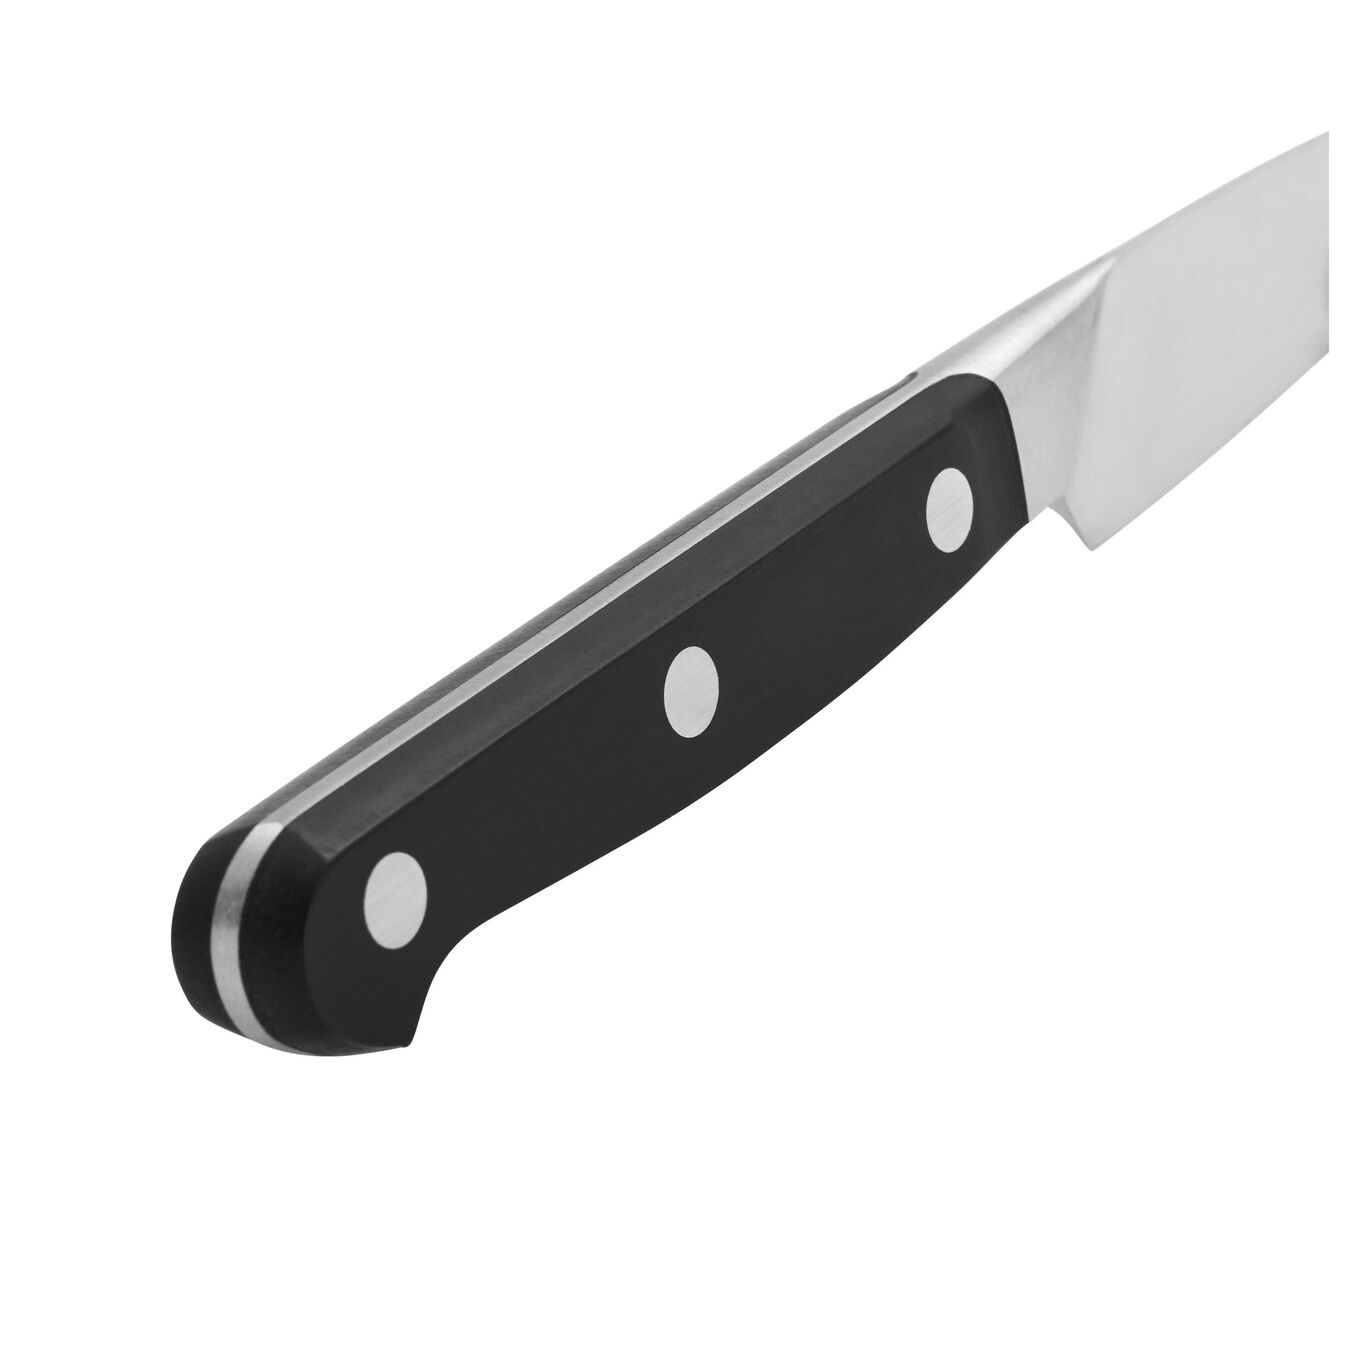 4-inch, Paring knife,,large 4